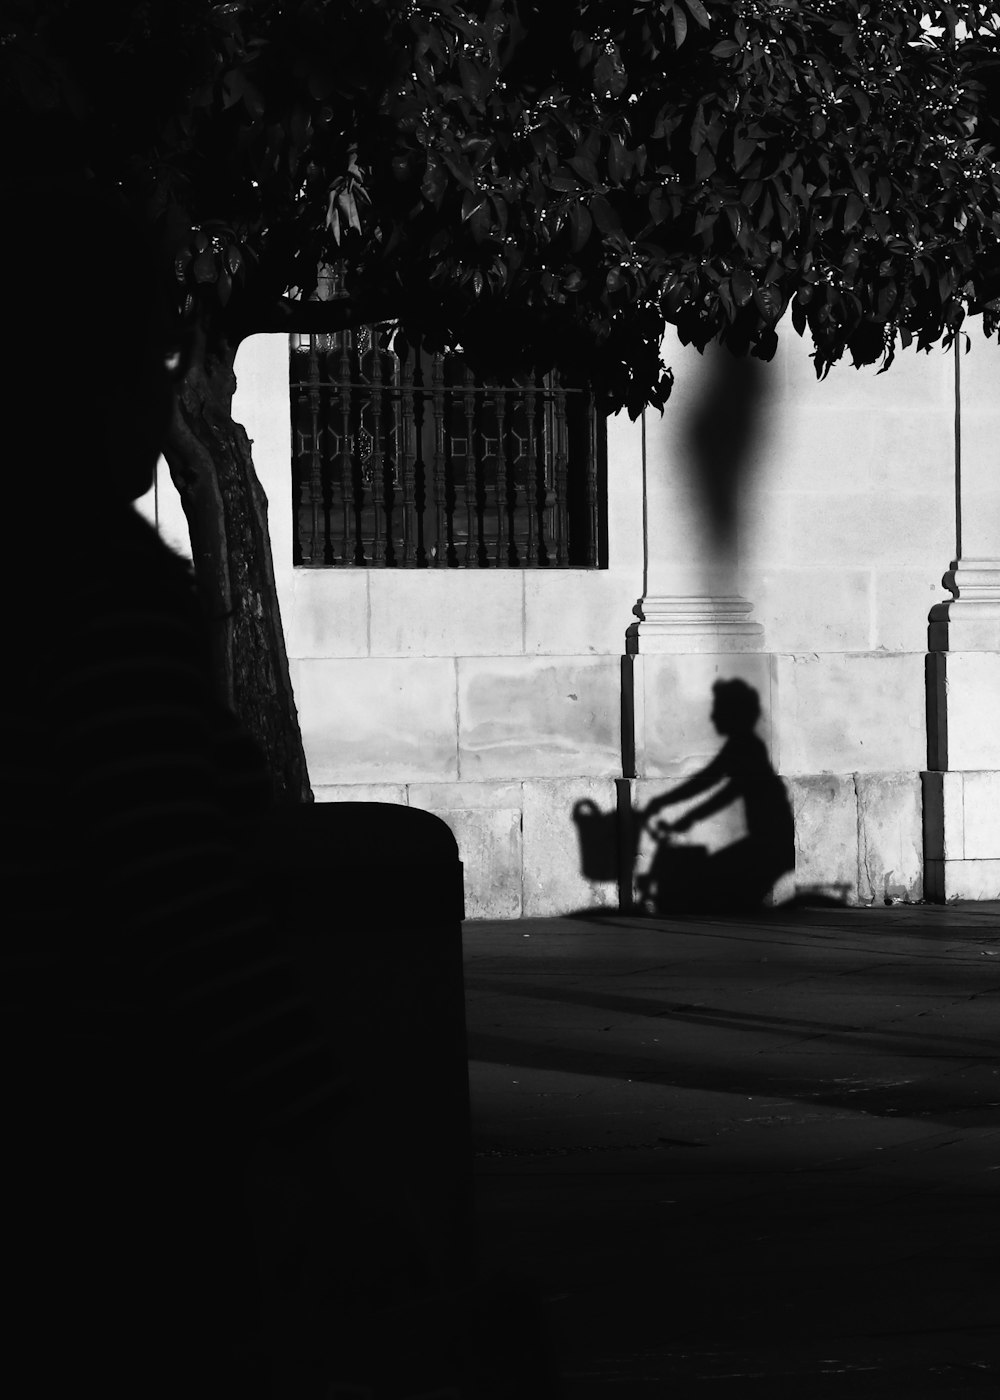 a person sitting on a bench under a tree